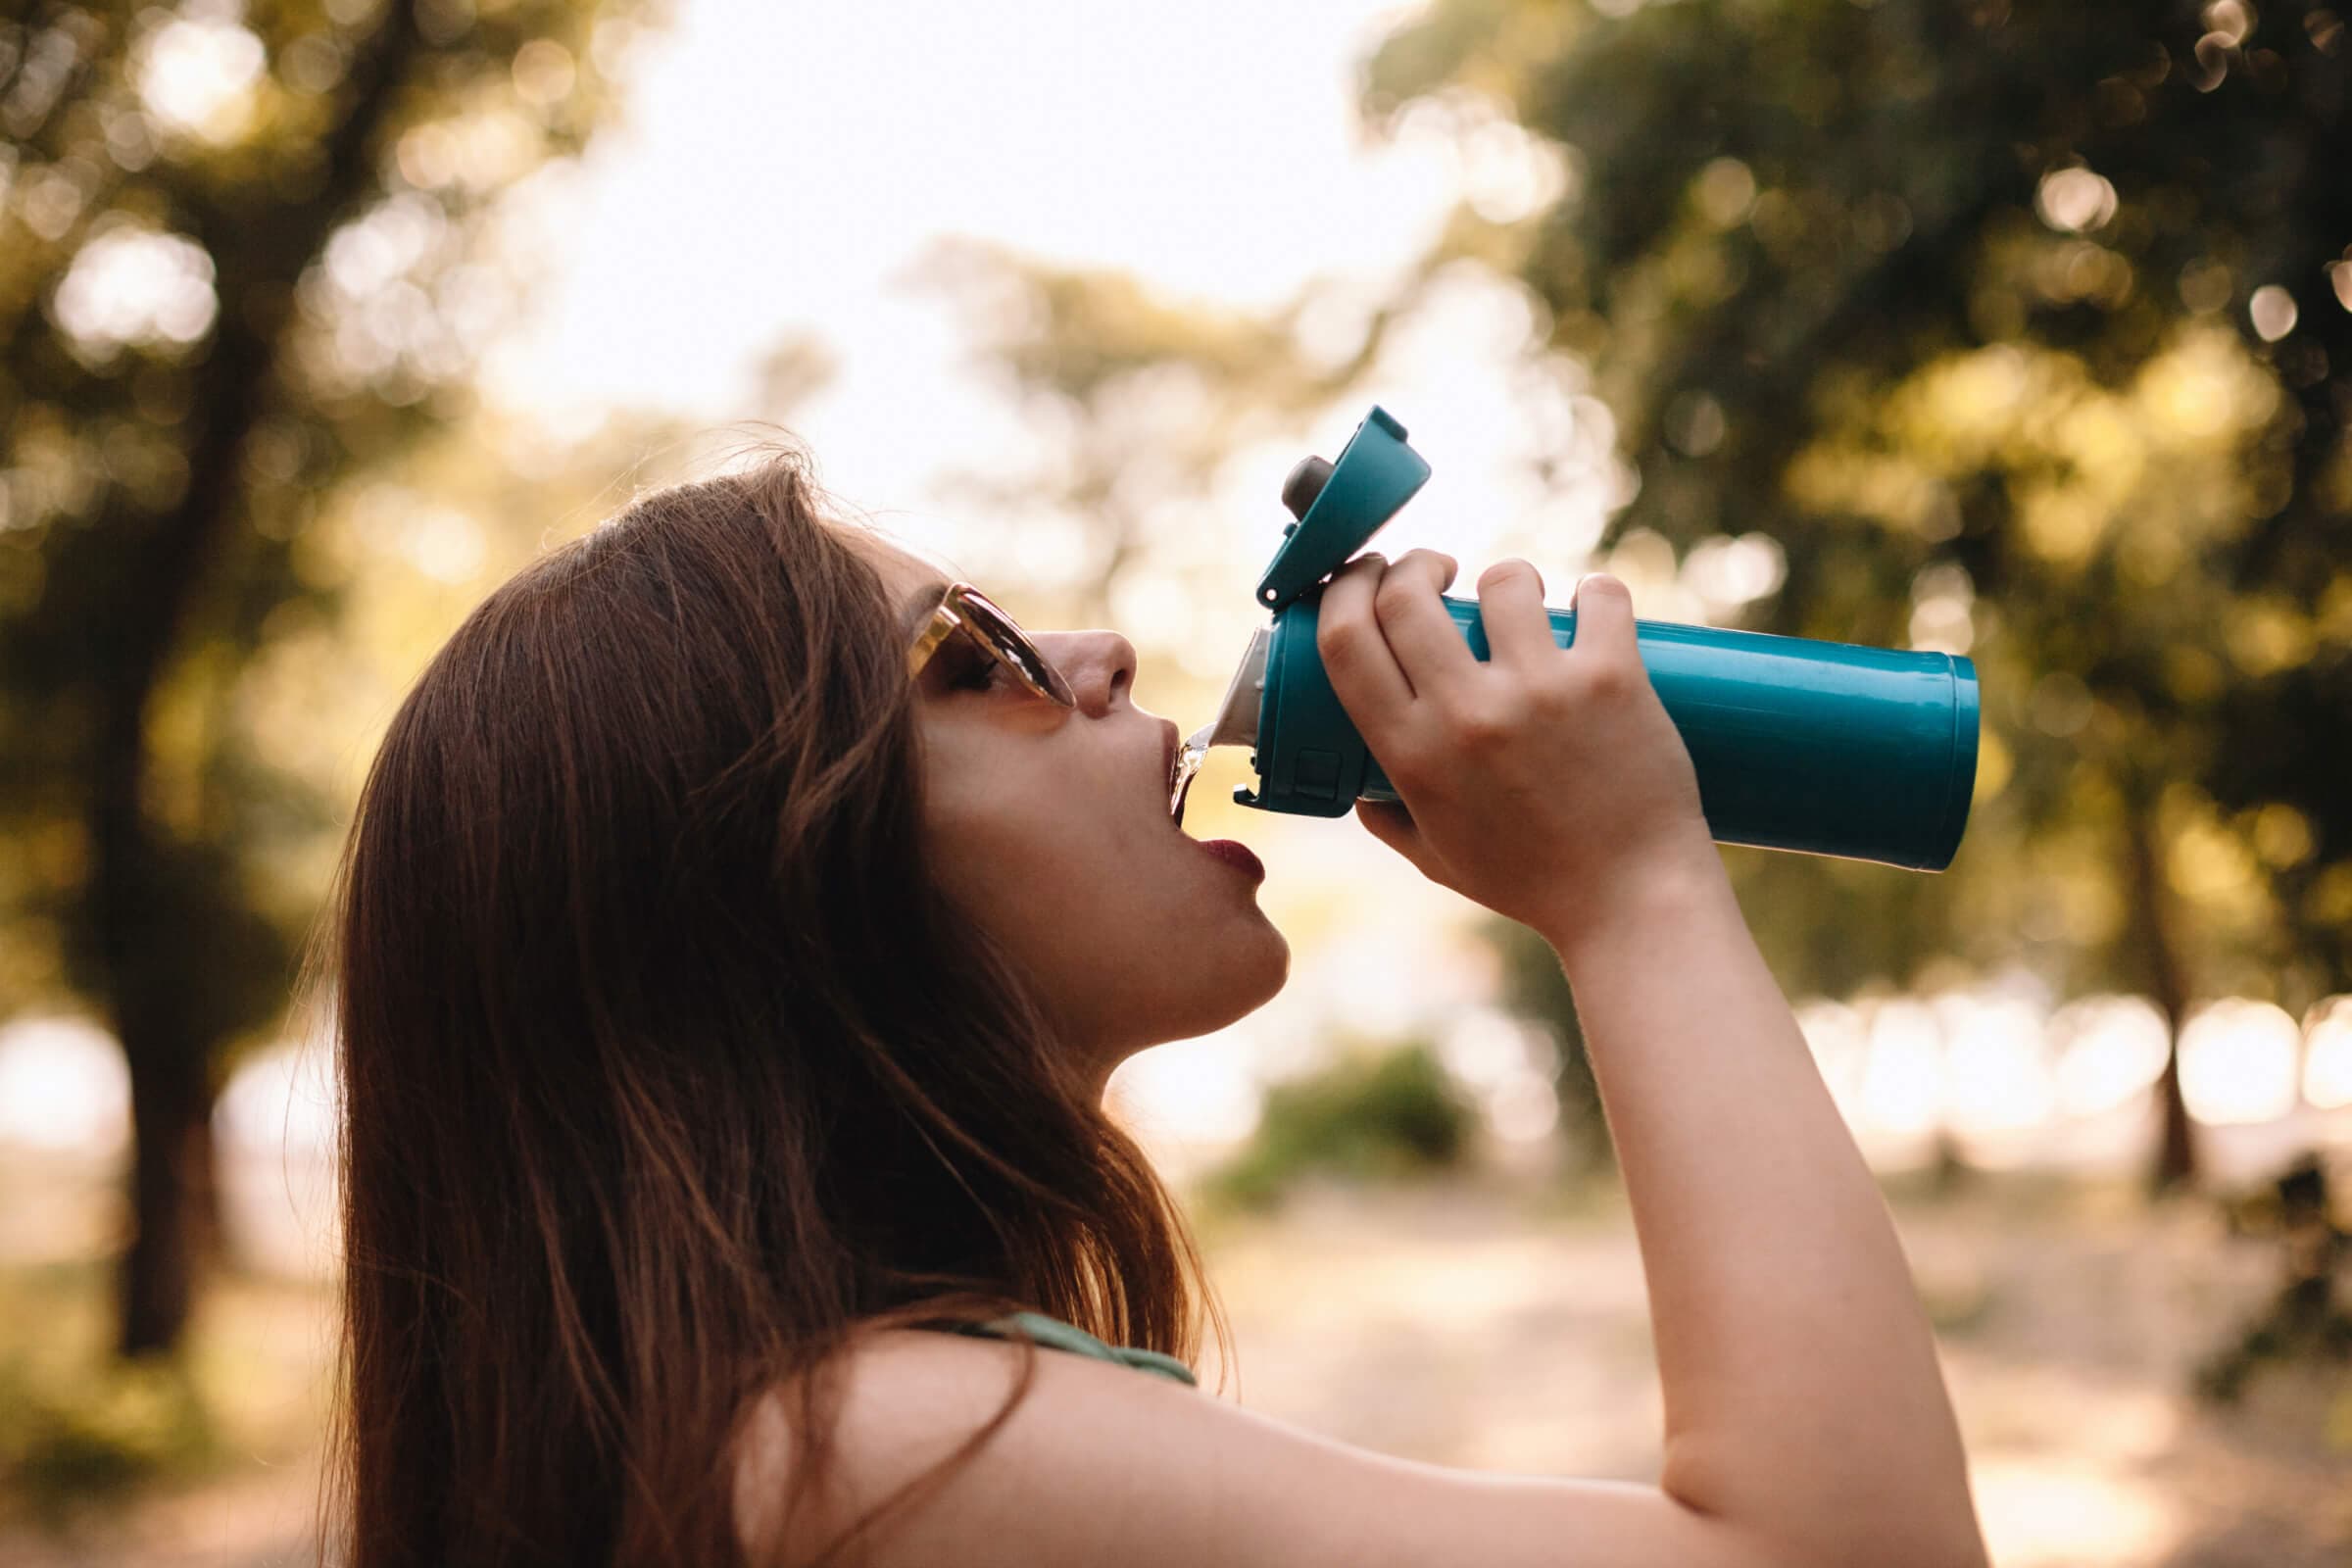 Woman drinking water from a water bottle